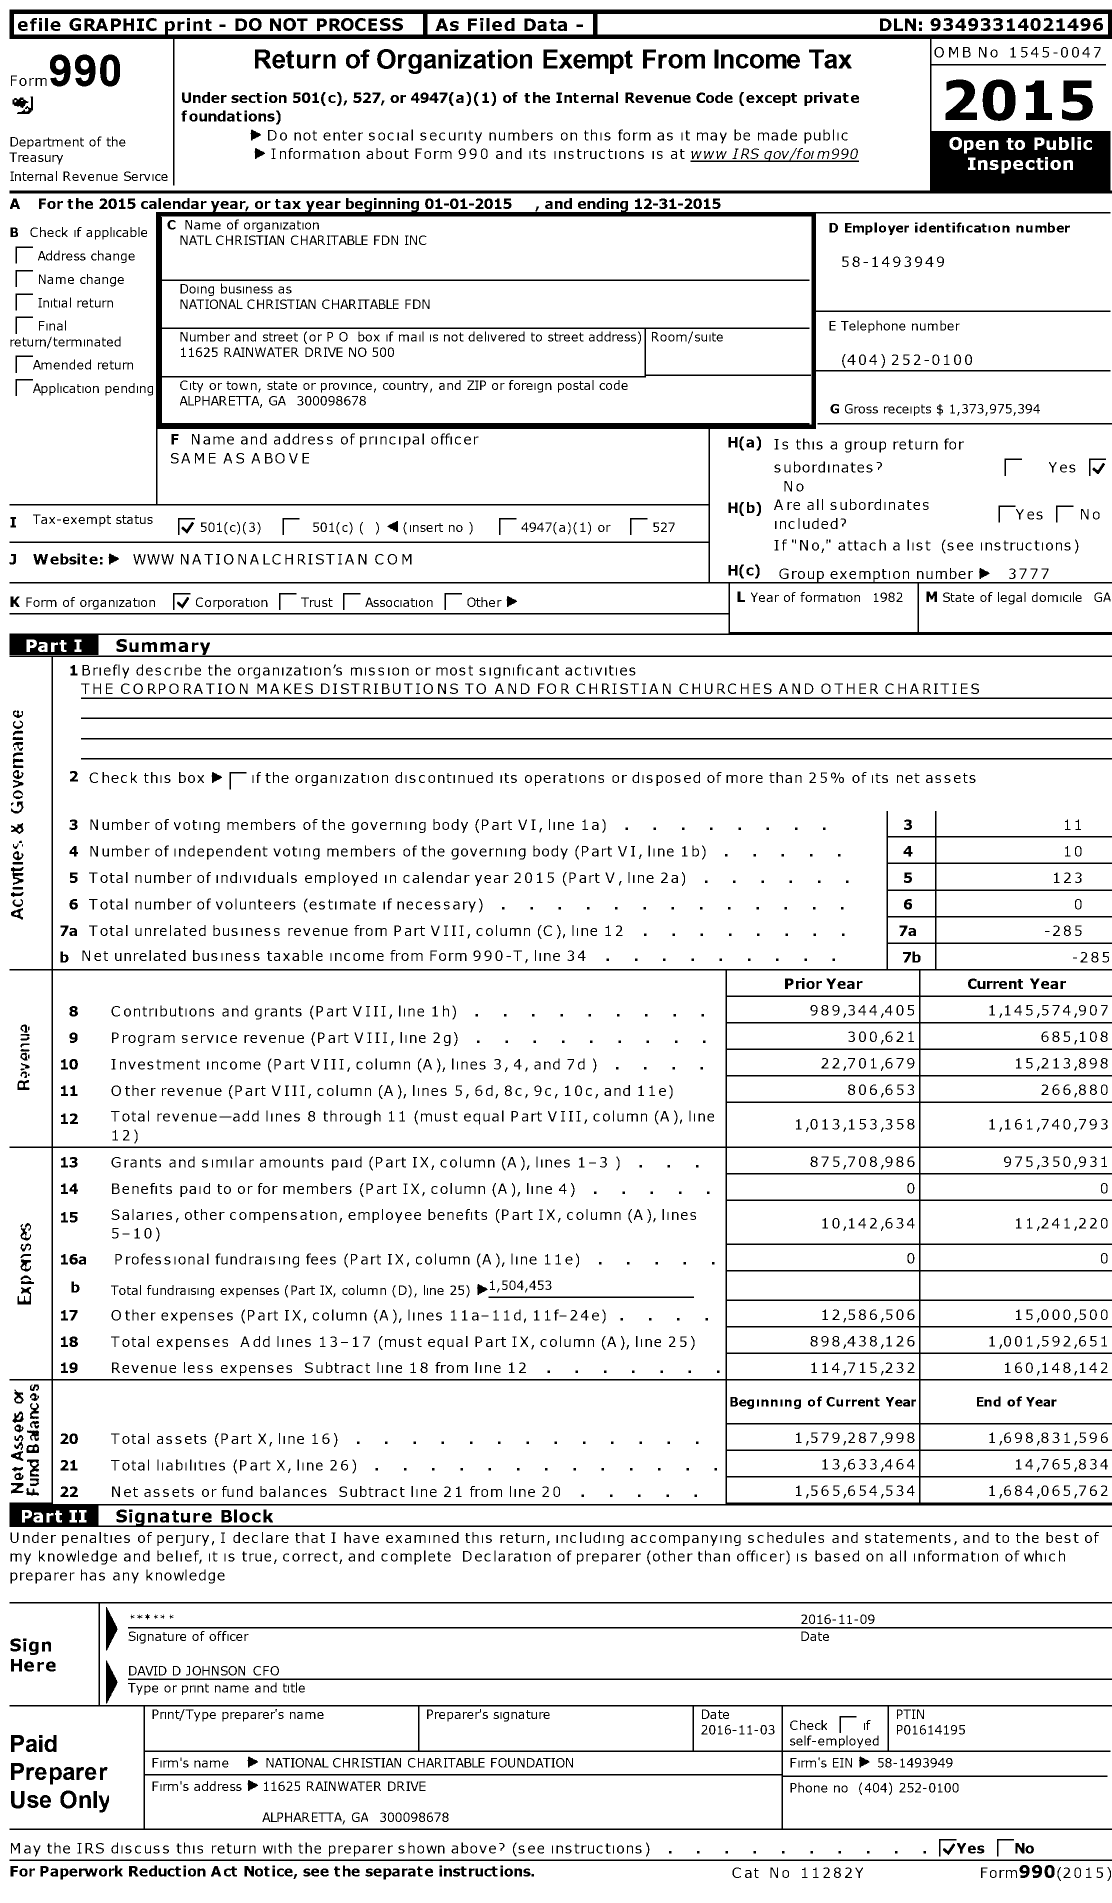 Image of first page of 2015 Form 990 for National Christian Foundation / Natl Christian Charitable FDN Inc